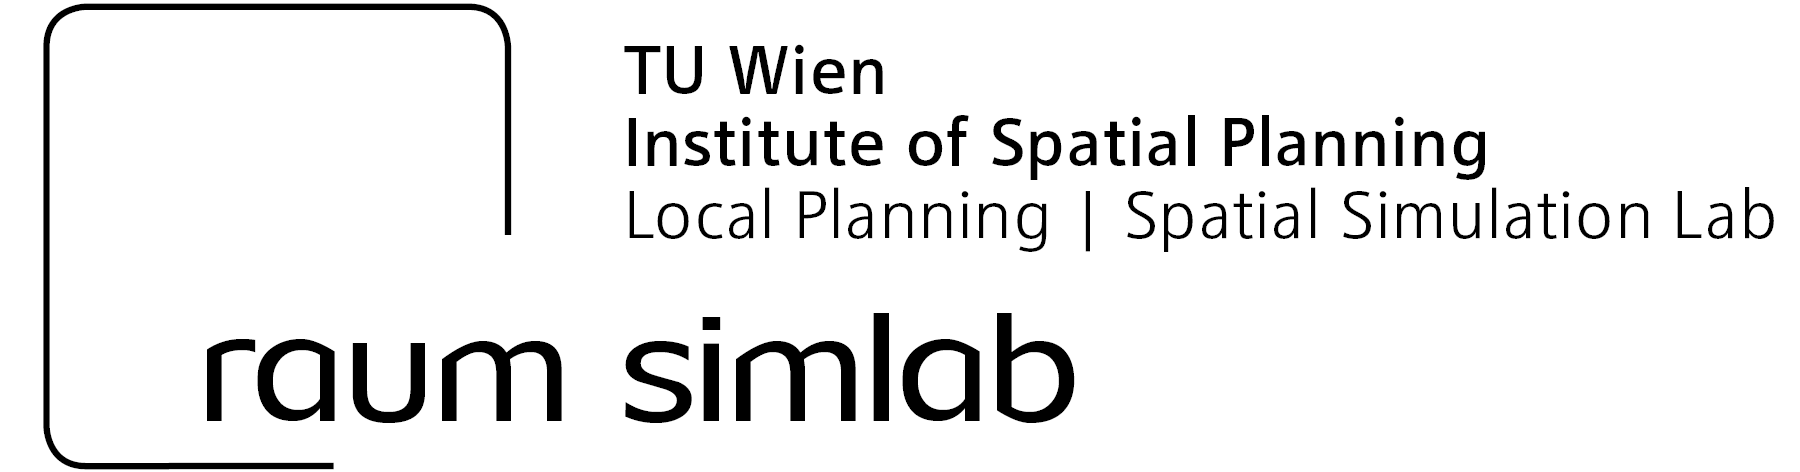 Logo of the Spatial Simulation Lab